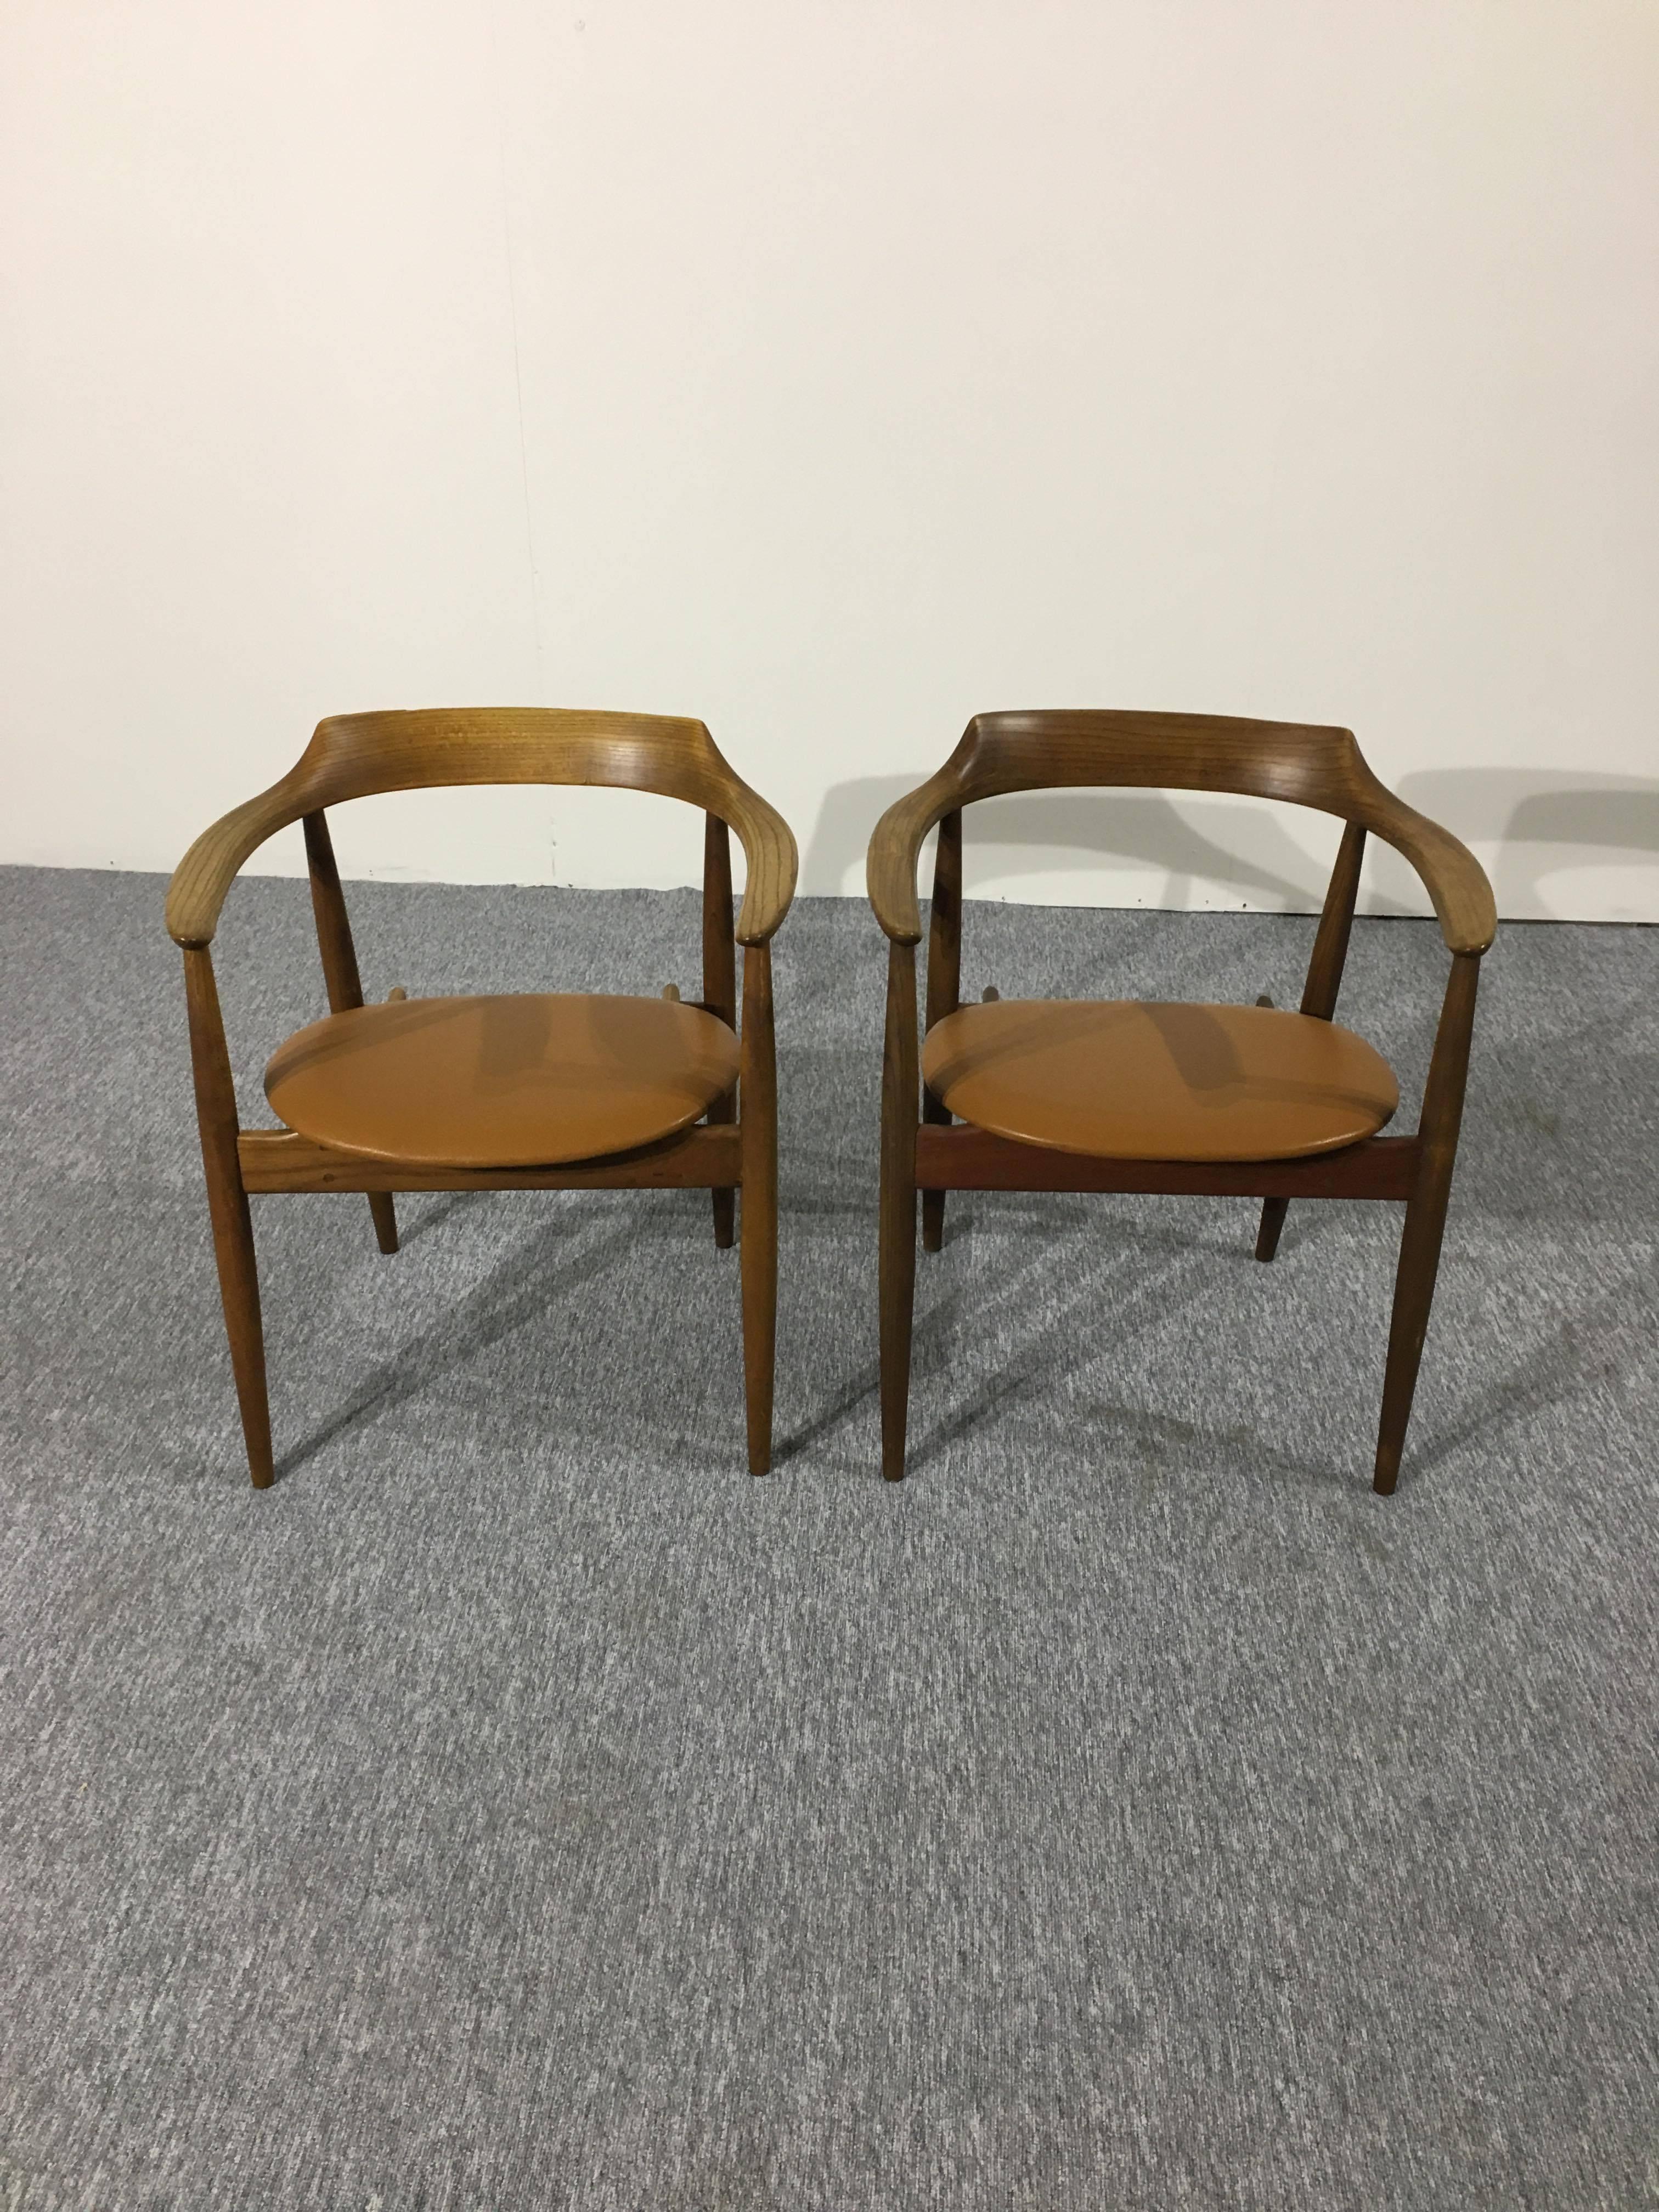 Arne Wahl Armchairs Model ST750 Mid-Century Modern 1960s Elm Wood, Leather In Excellent Condition For Sale In Odense, DK